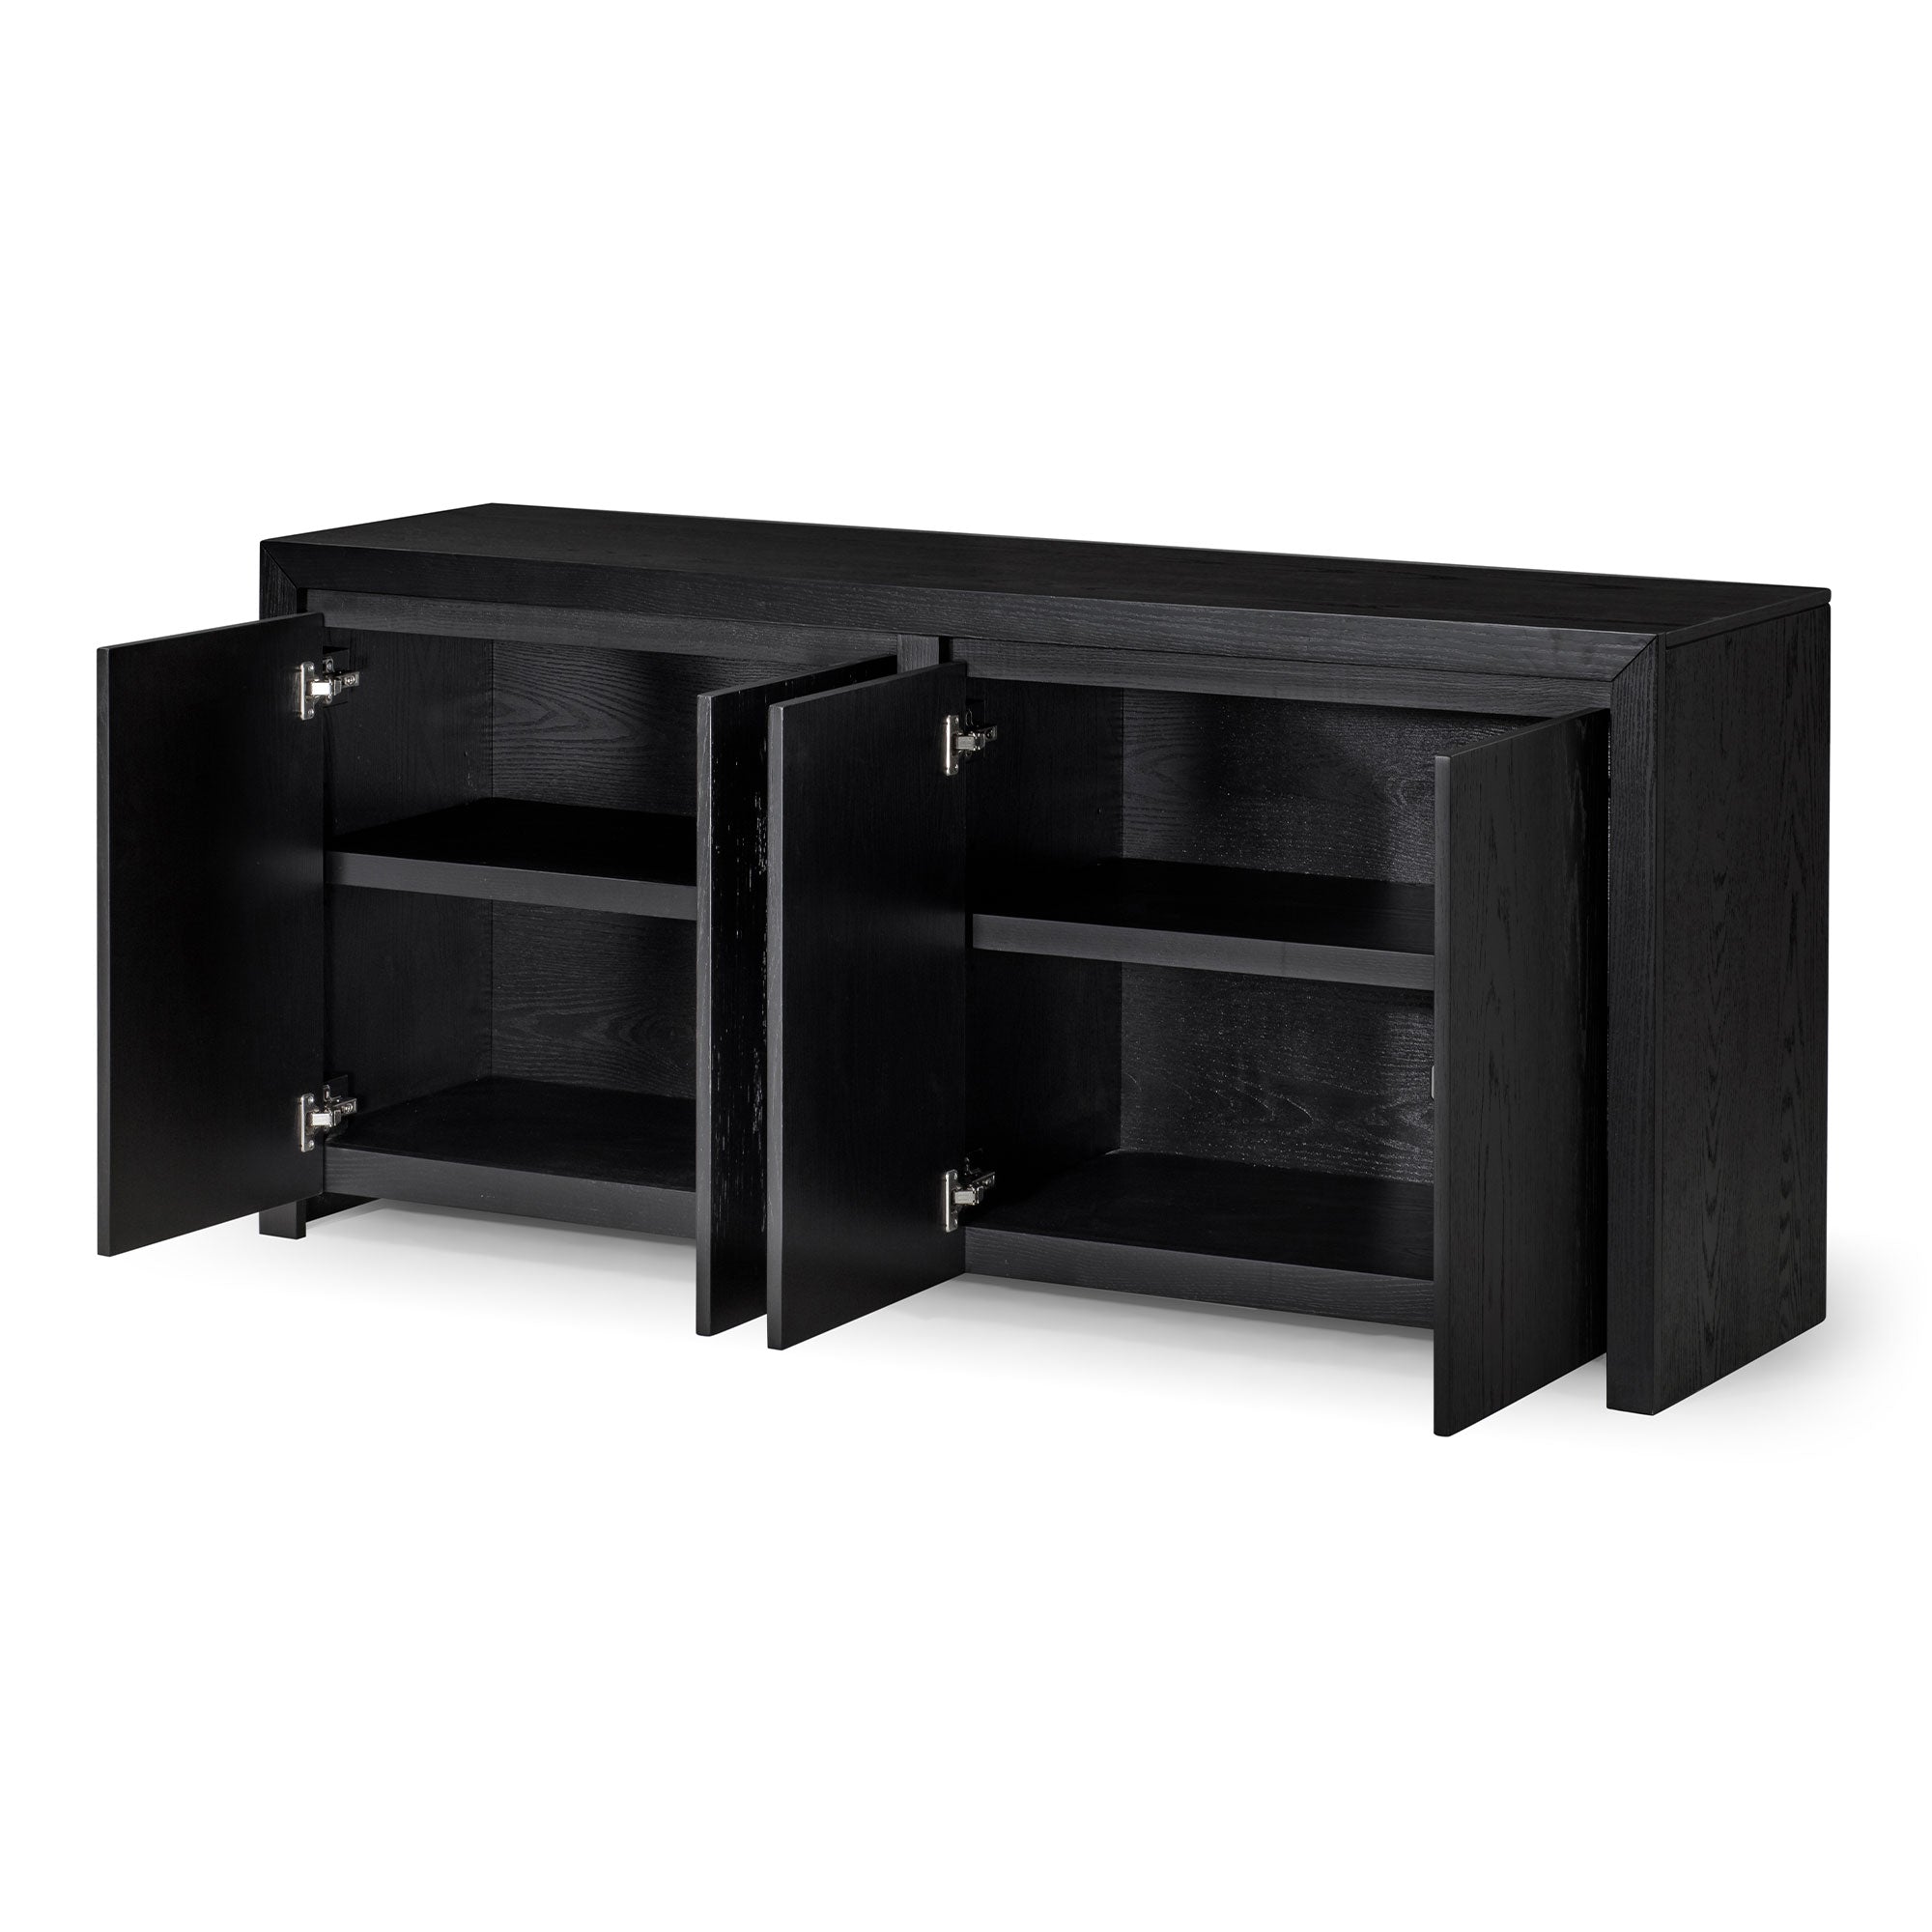 Iris Contemporary Wooden Sideboard in Refined Black Finish in Cabinets by Maven Lane